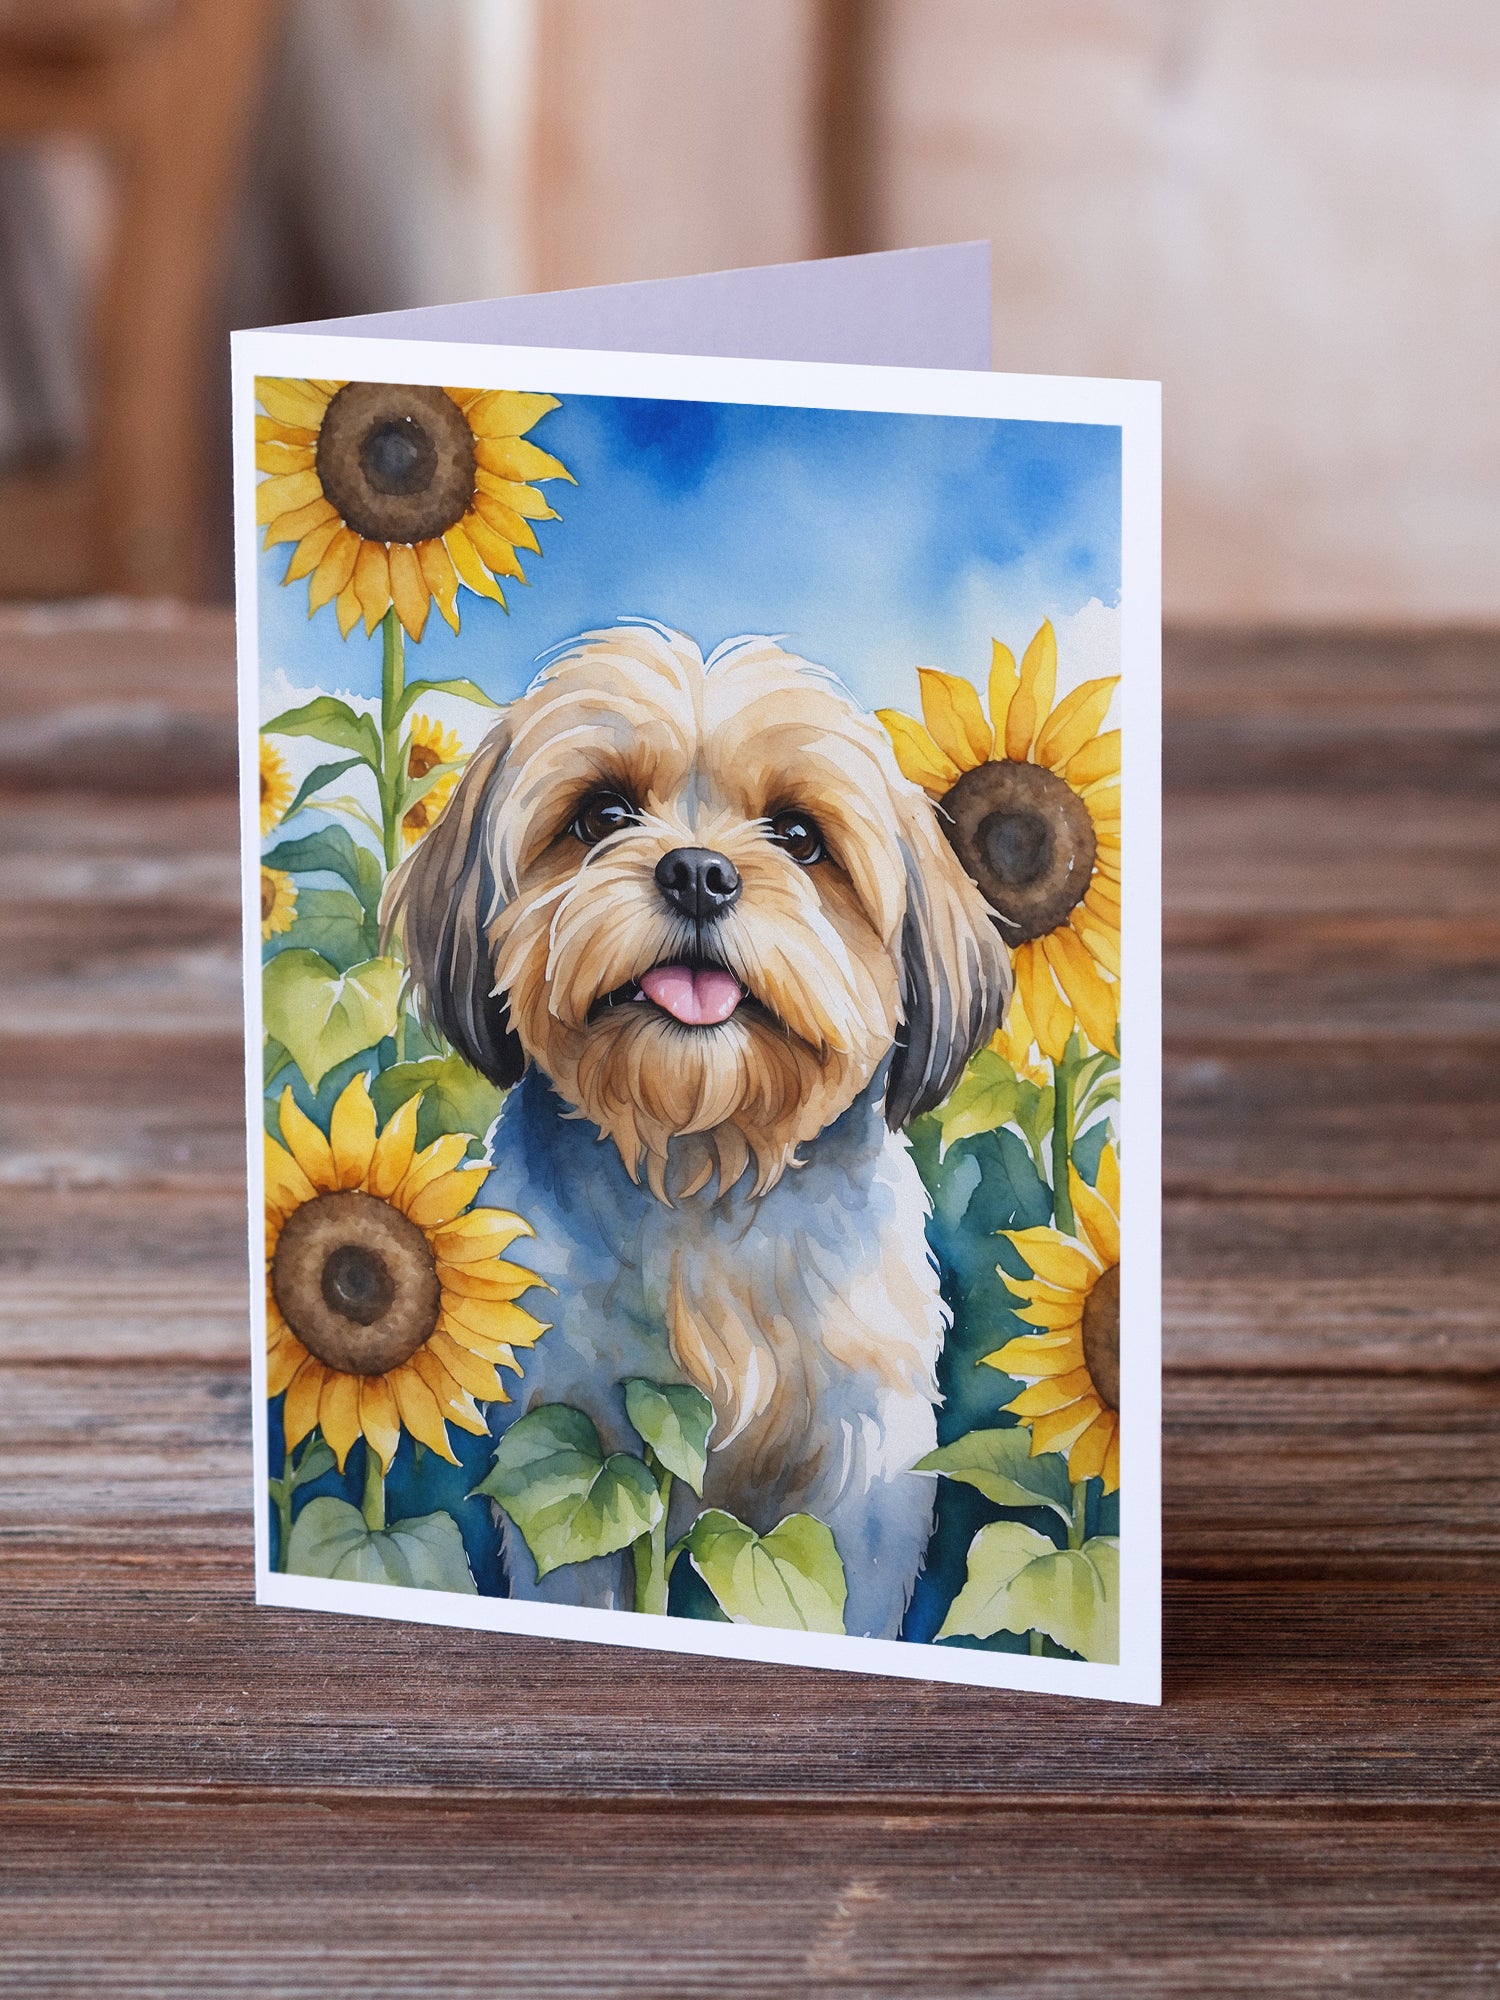 Buy this Lhasa Apso in Sunflowers Greeting Cards Pack of 8